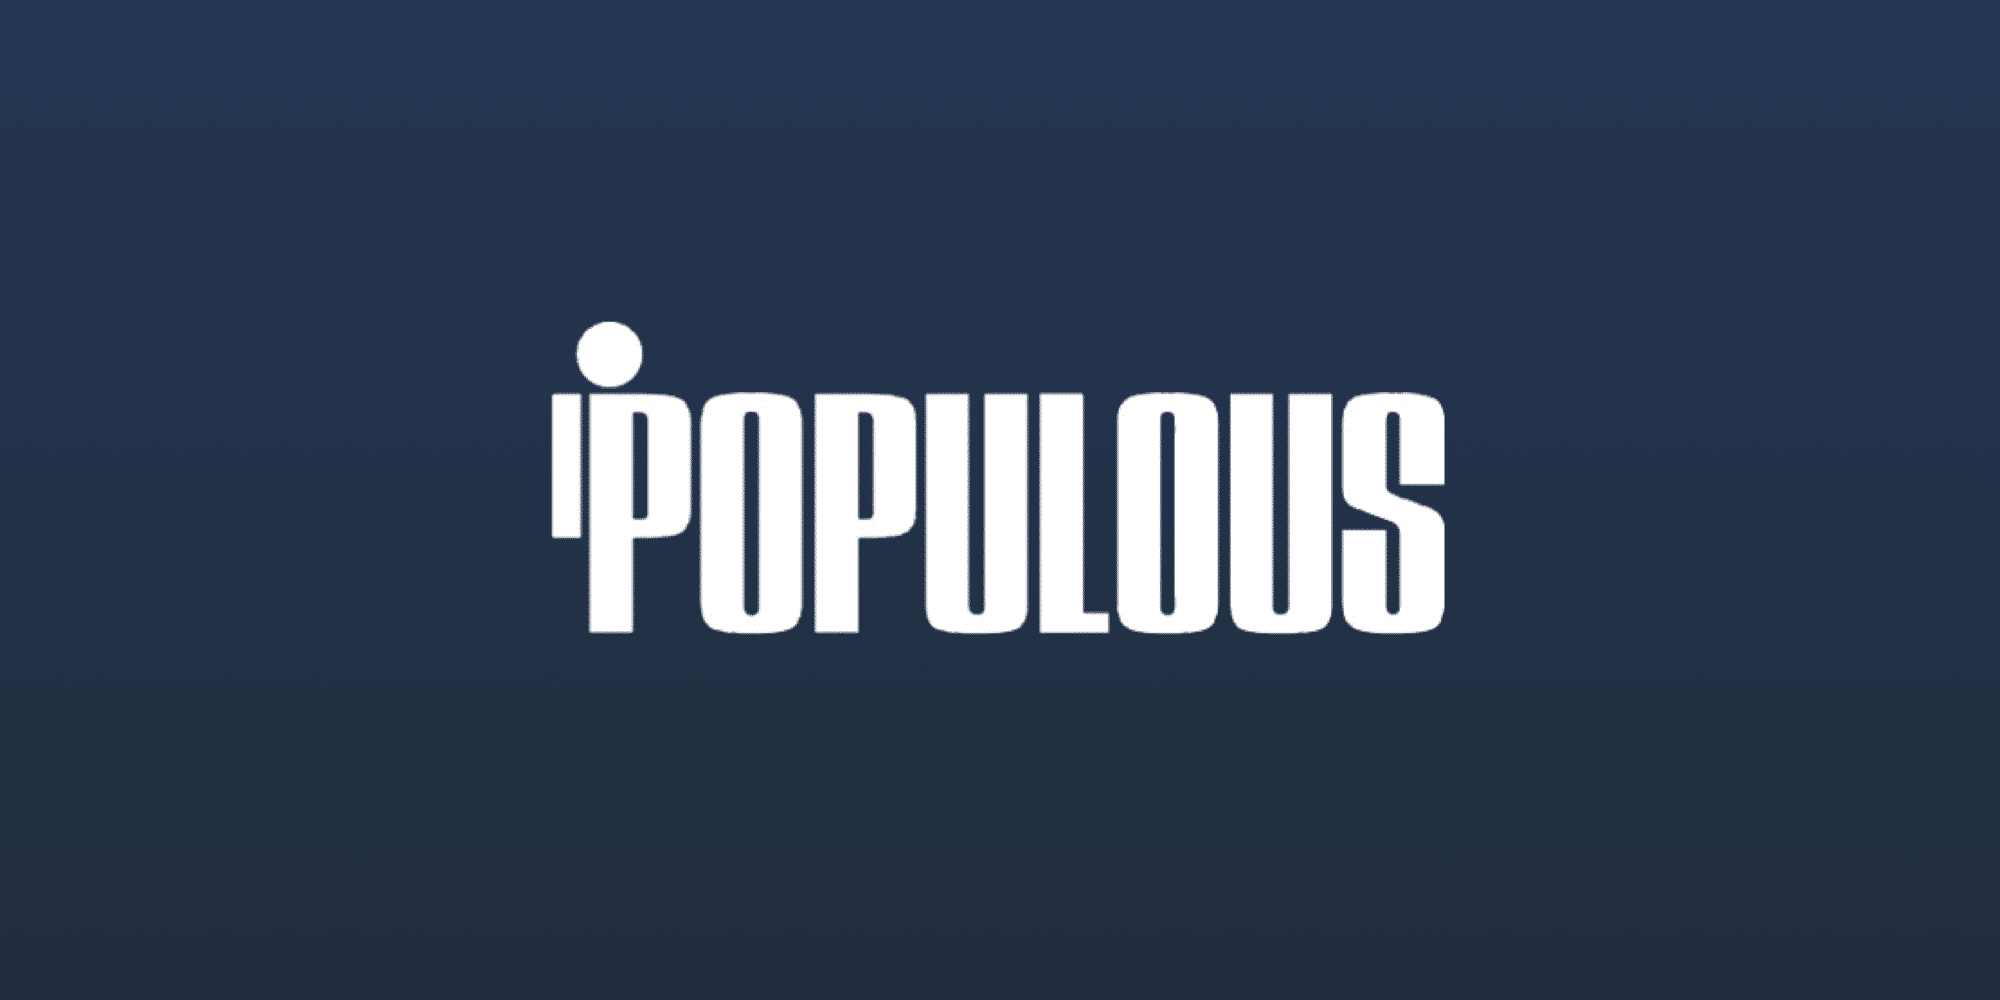 What Is Populous (PPT)? | A Guide to the P2P Invoice Financing Platform